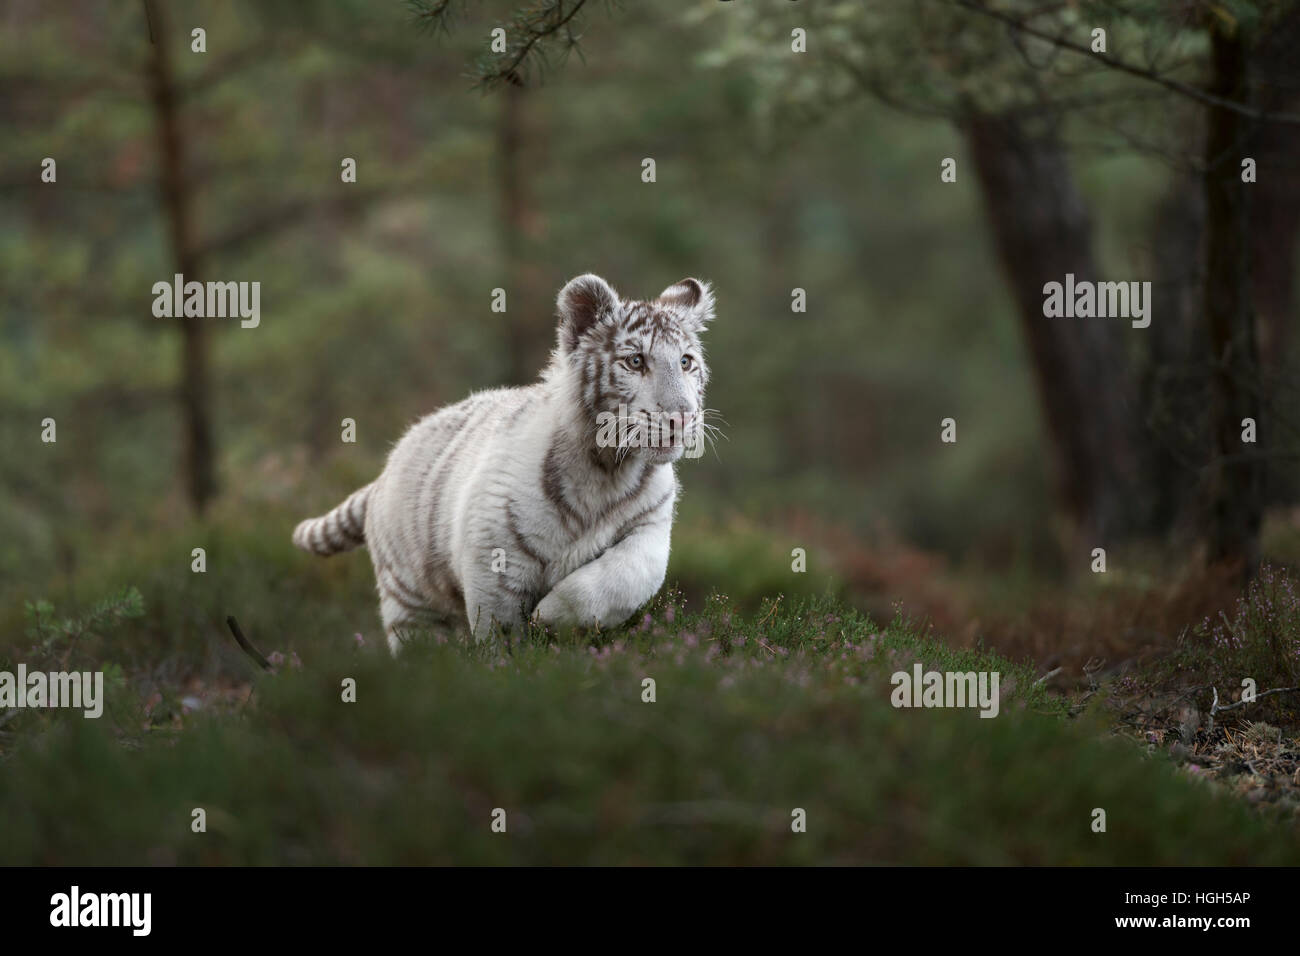 Royal Bengal Tiger ( Panthera tigris ), white morph, running fast, jumping through a natural forest, low point of view. Stock Photo